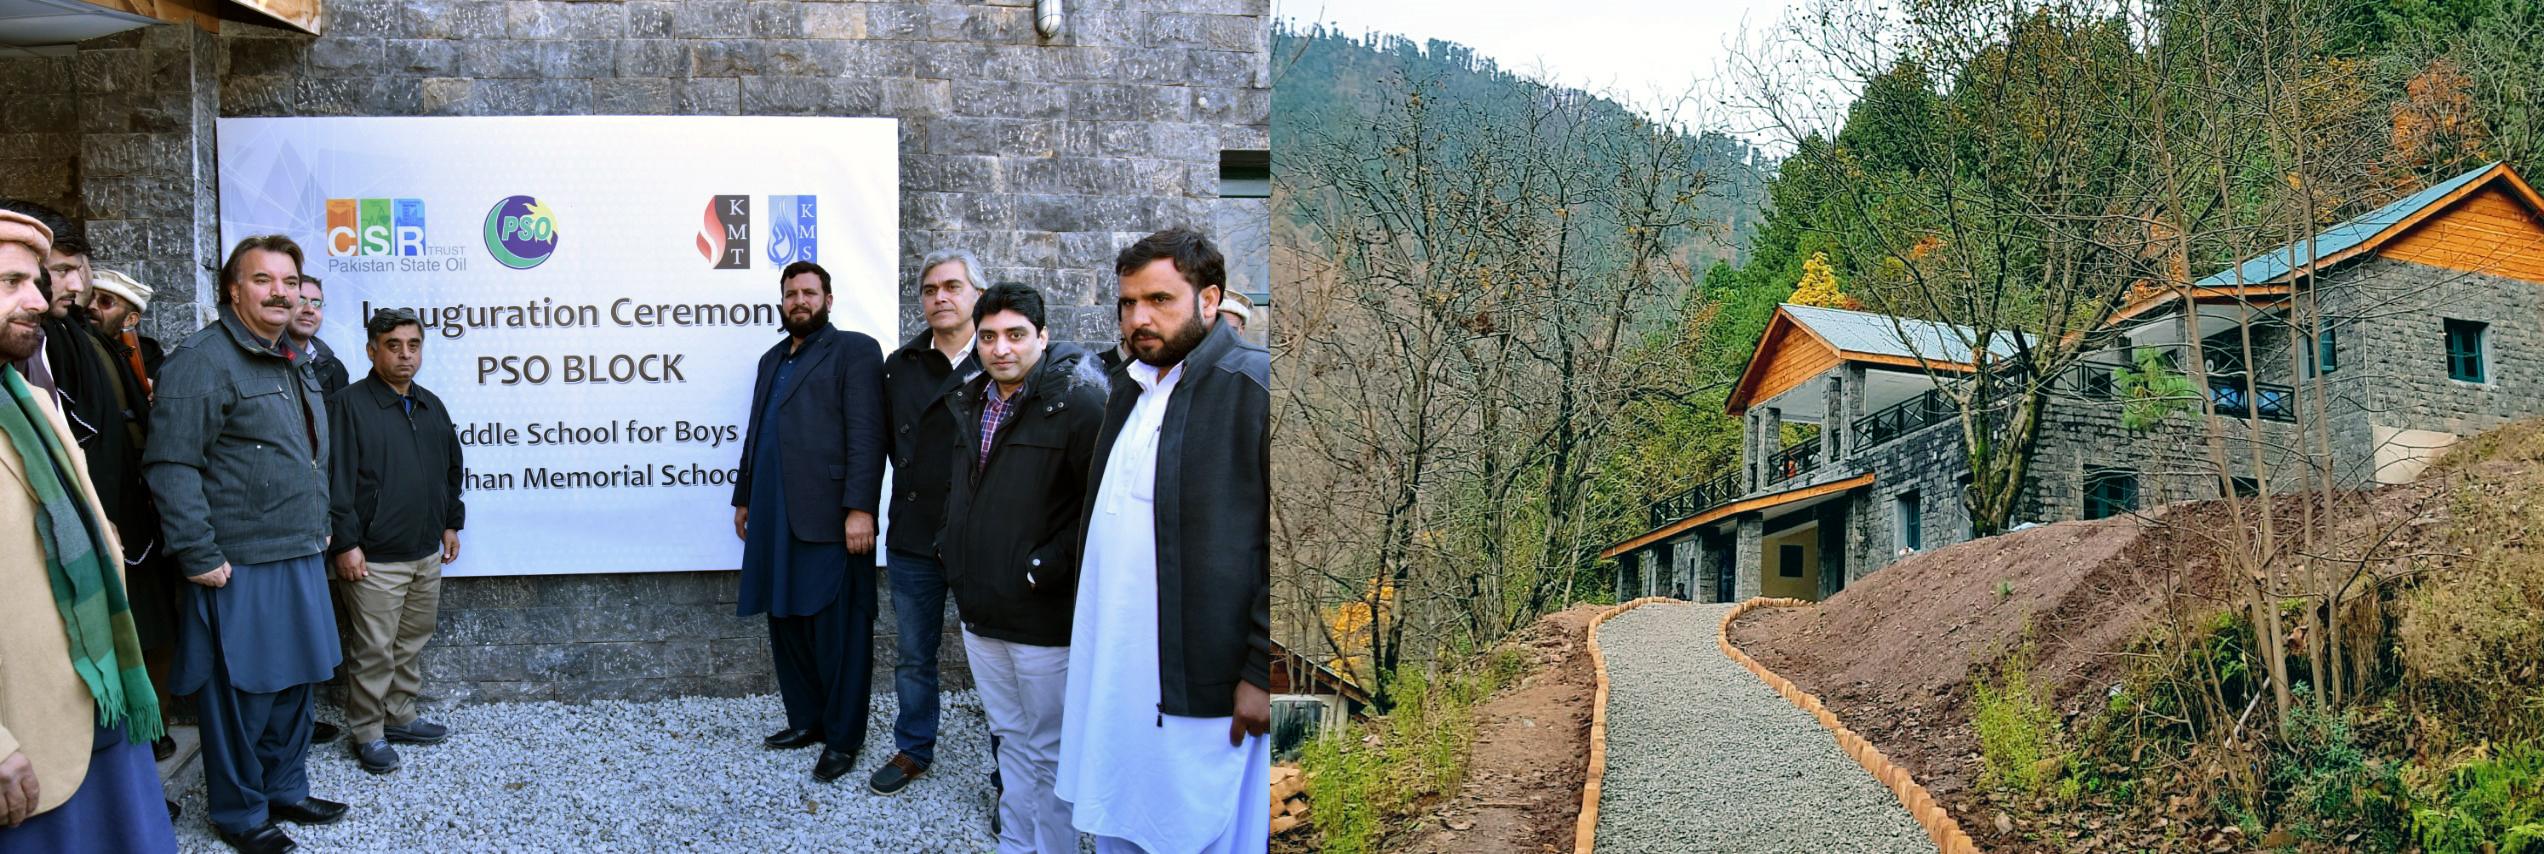 PSO BLOCK – NEW MIDDLE SCHOOL BLOCK FOR BOYS AT THE KAGHAN MEMORIAL SCHOOL INAUGURATED